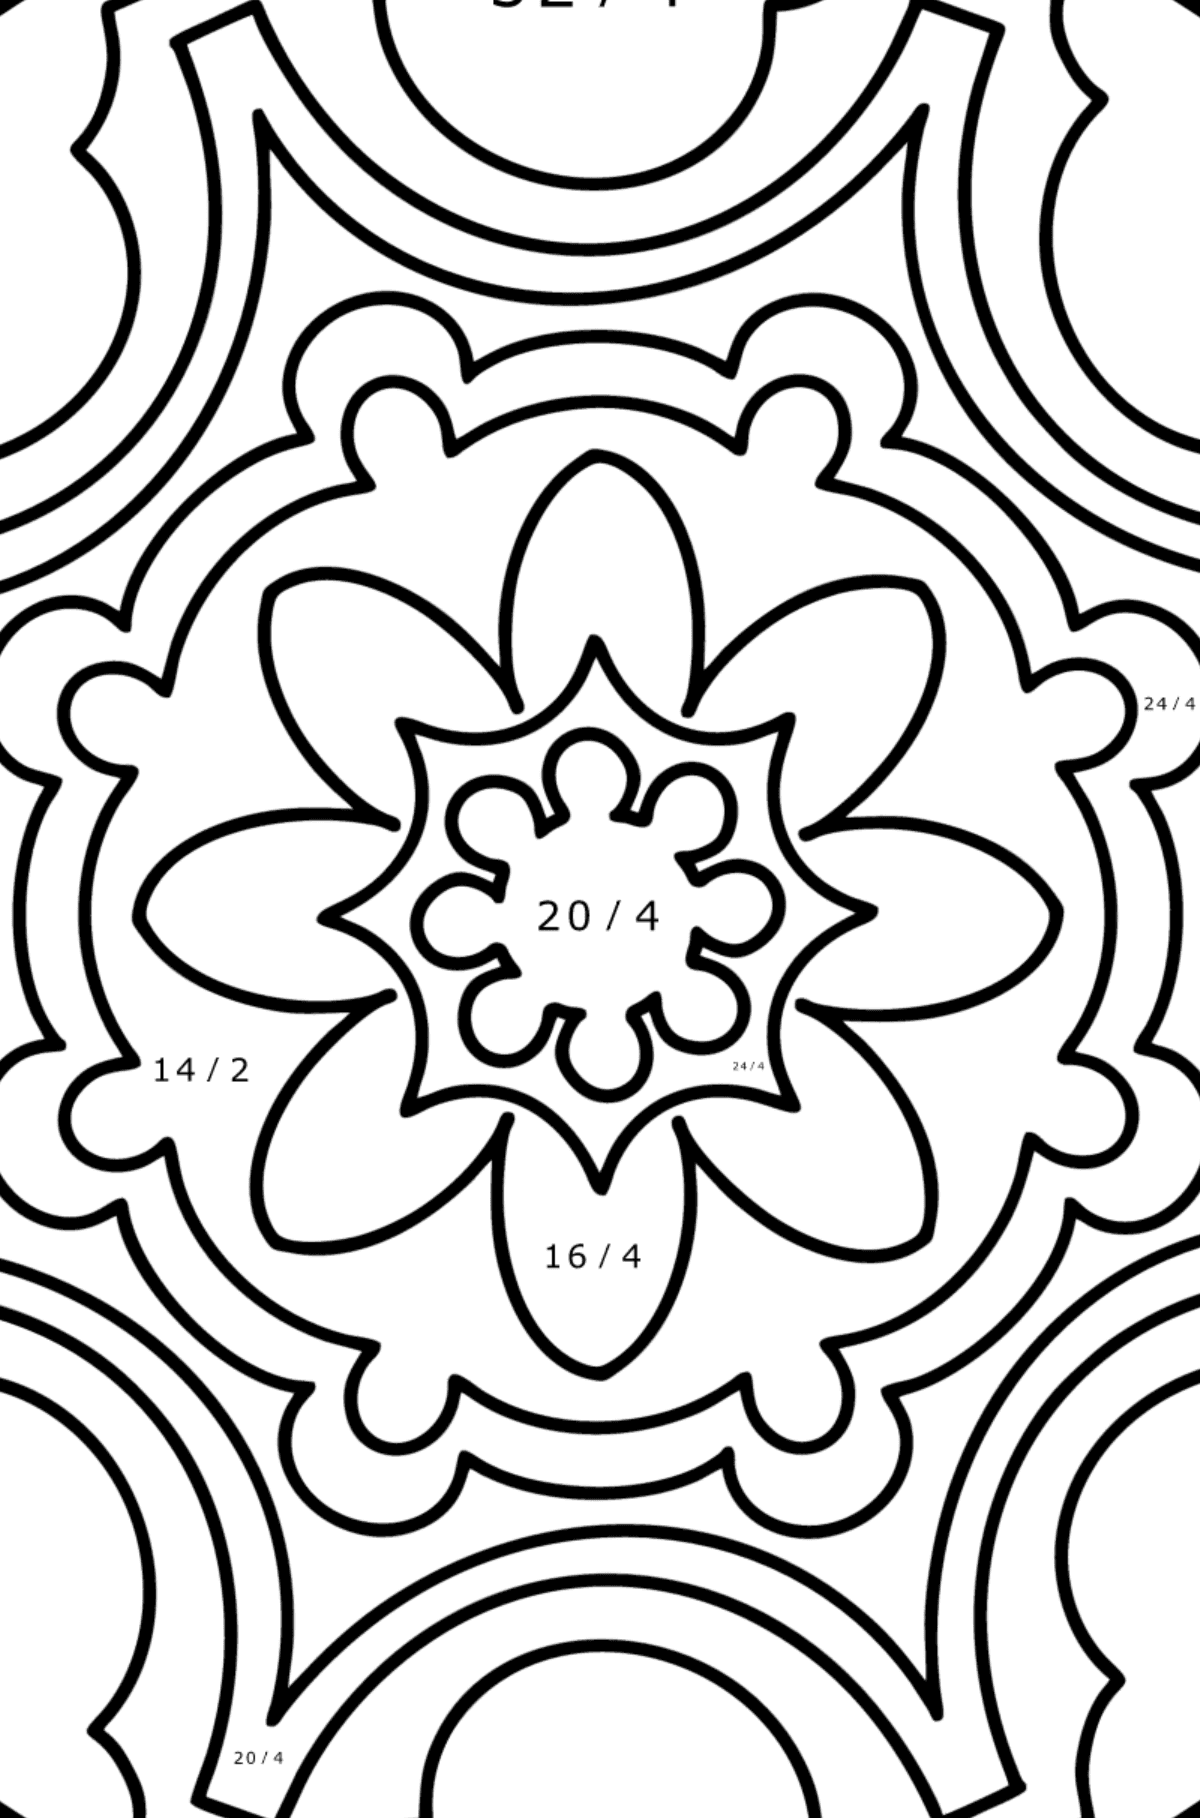 Mandala coloring page - 9 elements - Math Coloring - Division for Kids